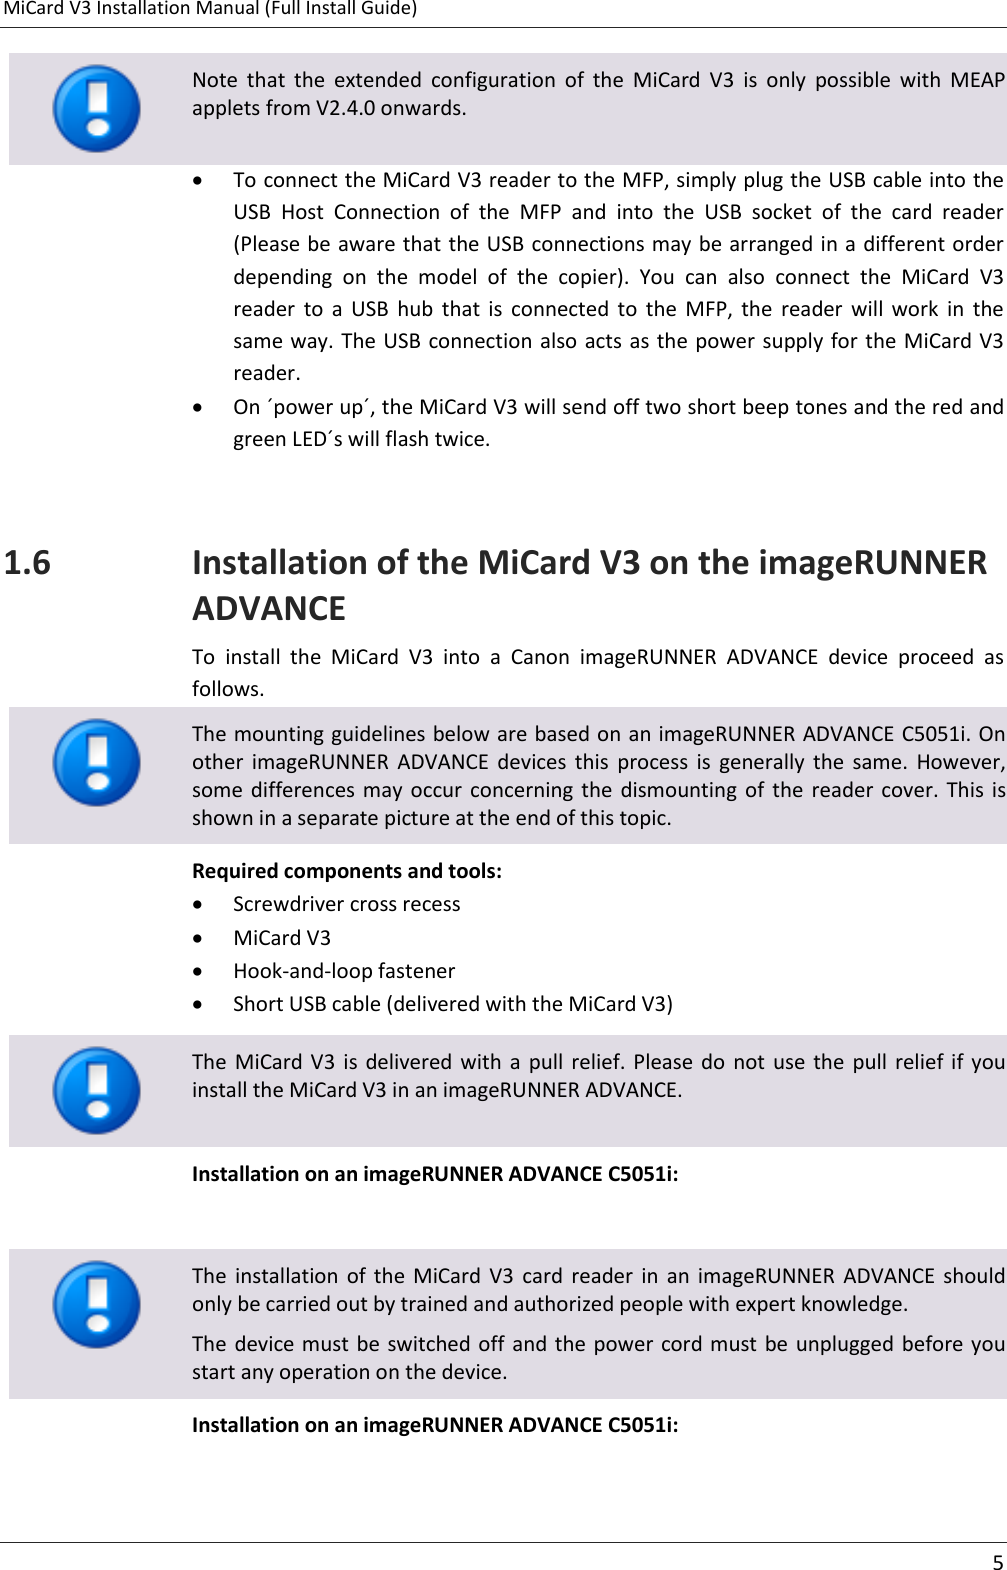 MiCard V3 Installation Manual (Full Install Guide)      5   Note  that  the  extended  configuration  of  the  MiCard  V3  is  only  possible  with  MEAP applets from V2.4.0 onwards.  To connect the MiCard V3 reader to the MFP, simply plug the USB cable into the USB  Host  Connection  of  the  MFP  and  into  the  USB  socket  of  the  card  reader (Please be aware that the USB connections may be arranged in a different order depending  on  the  model  of  the  copier).  You  can  also  connect  the  MiCard  V3 reader  to  a  USB  hub  that  is  connected  to  the  MFP,  the  reader  will  work  in  the same way. The USB connection also acts as the power supply for the MiCard V3 reader.  On ´power up´, the MiCard V3 will send off two short beep tones and the red and green LED´s will flash twice.  1.6 Installation of the MiCard V3 on the imageRUNNER ADVANCE To  install  the  MiCard  V3  into  a  Canon  imageRUNNER  ADVANCE  device  proceed  as follows.  The mounting guidelines below are based on an imageRUNNER ADVANCE C5051i. On other  imageRUNNER  ADVANCE  devices  this  process  is  generally  the  same.  However, some  differences may  occur concerning  the  dismounting  of  the  reader cover.  This  is shown in a separate picture at the end of this topic. Required components and tools:  Screwdriver cross recess  MiCard V3  Hook-and-loop fastener  Short USB cable (delivered with the MiCard V3)   The  MiCard V3  is  delivered with  a  pull  relief.  Please do  not  use  the  pull  relief  if  you install the MiCard V3 in an imageRUNNER ADVANCE. Installation on an imageRUNNER ADVANCE C5051i:    The  installation  of  the  MiCard  V3  card  reader  in  an  imageRUNNER  ADVANCE  should only be carried out by trained and authorized people with expert knowledge. The device must be switched off  and the power cord must  be unplugged before you start any operation on the device. Installation on an imageRUNNER ADVANCE C5051i: 